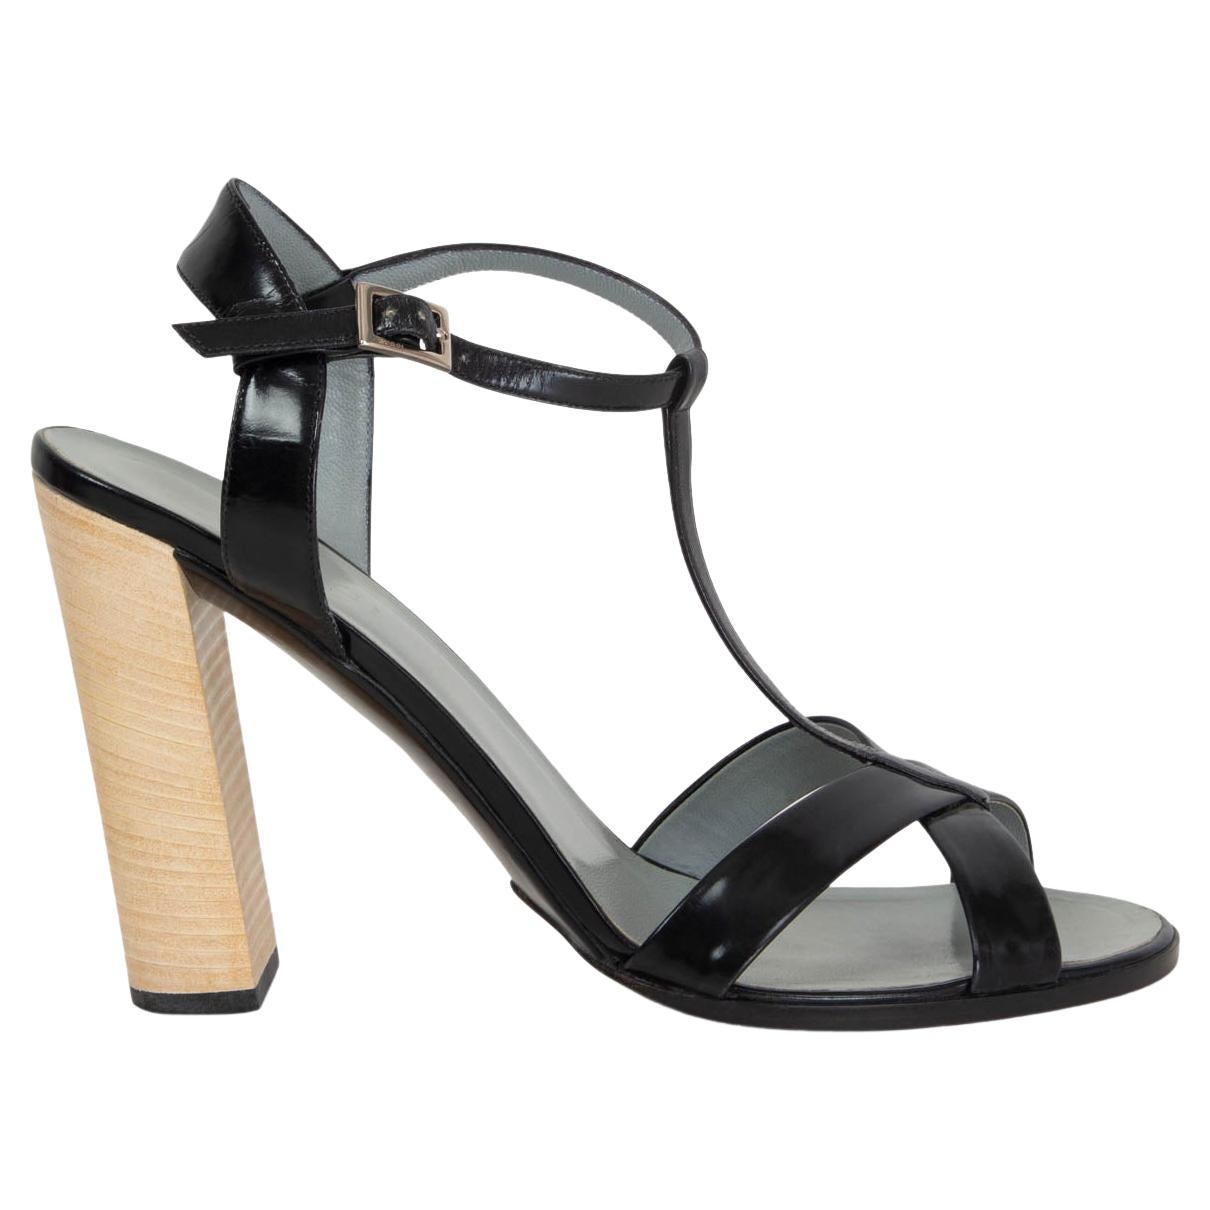 GUCCI x TOM FORD black leather BLOCK HEEL Sandals Shoes 40.5